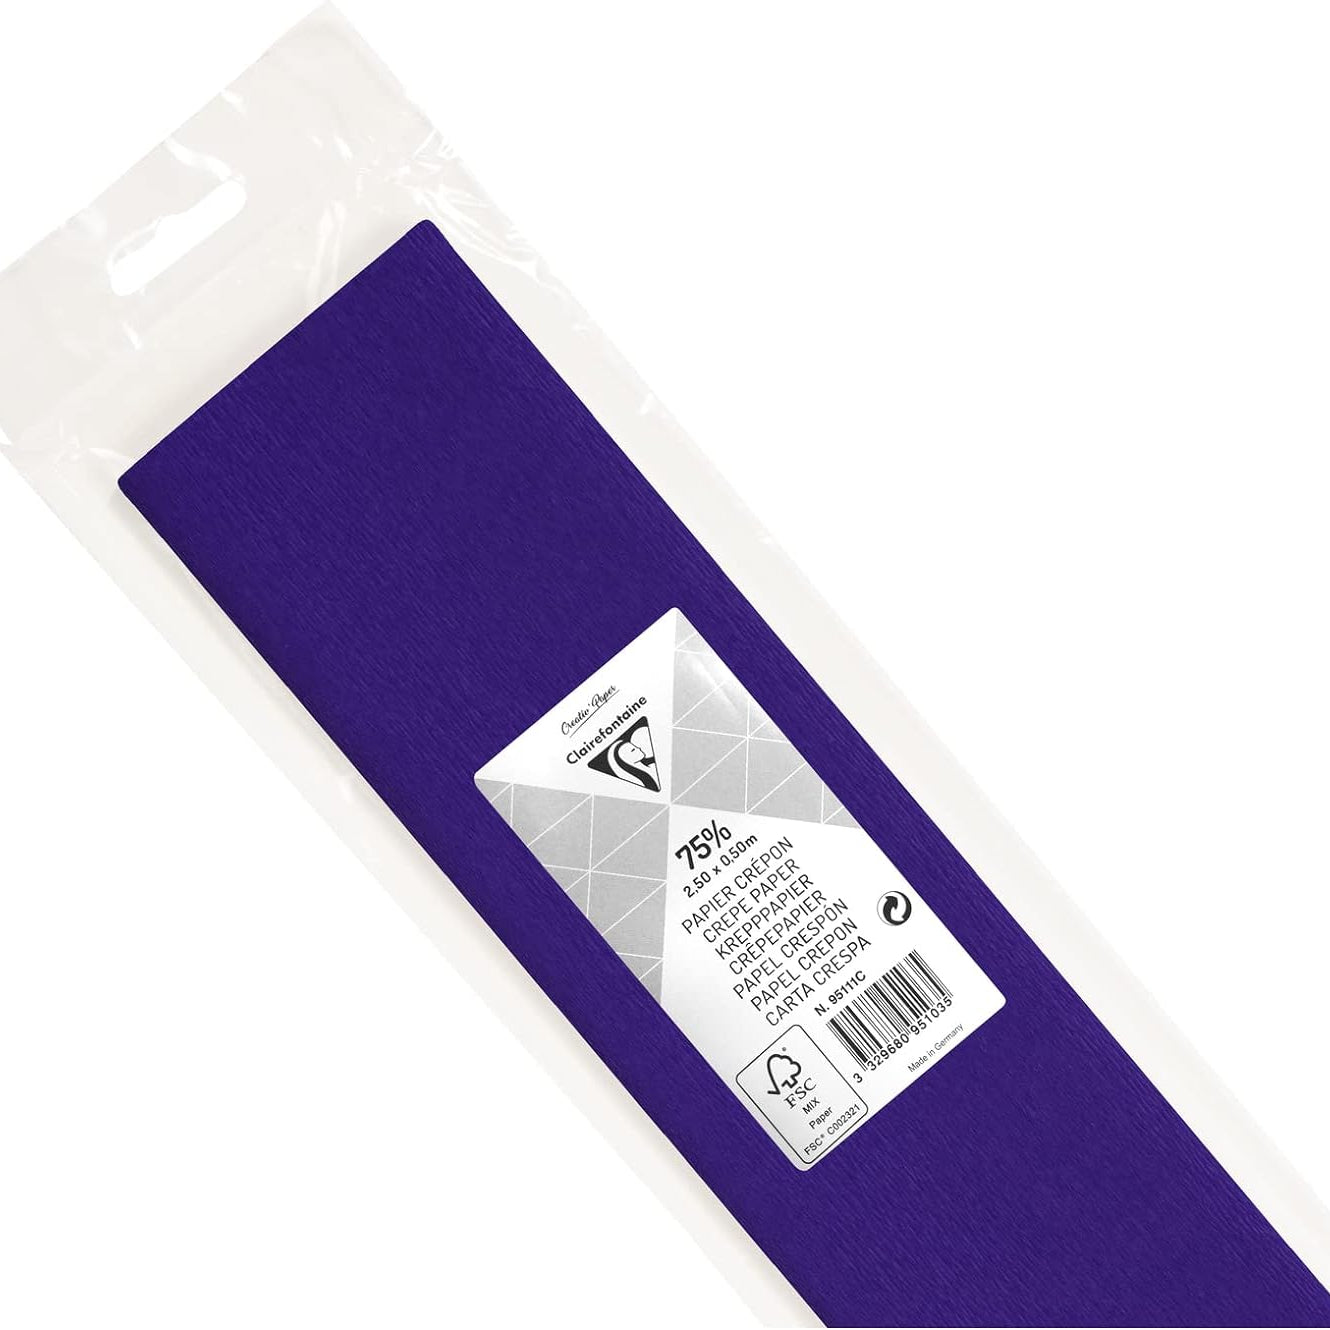 CLAIREFONTAINE Crepe Paper Roll 75% 2.5x0.5M Violet